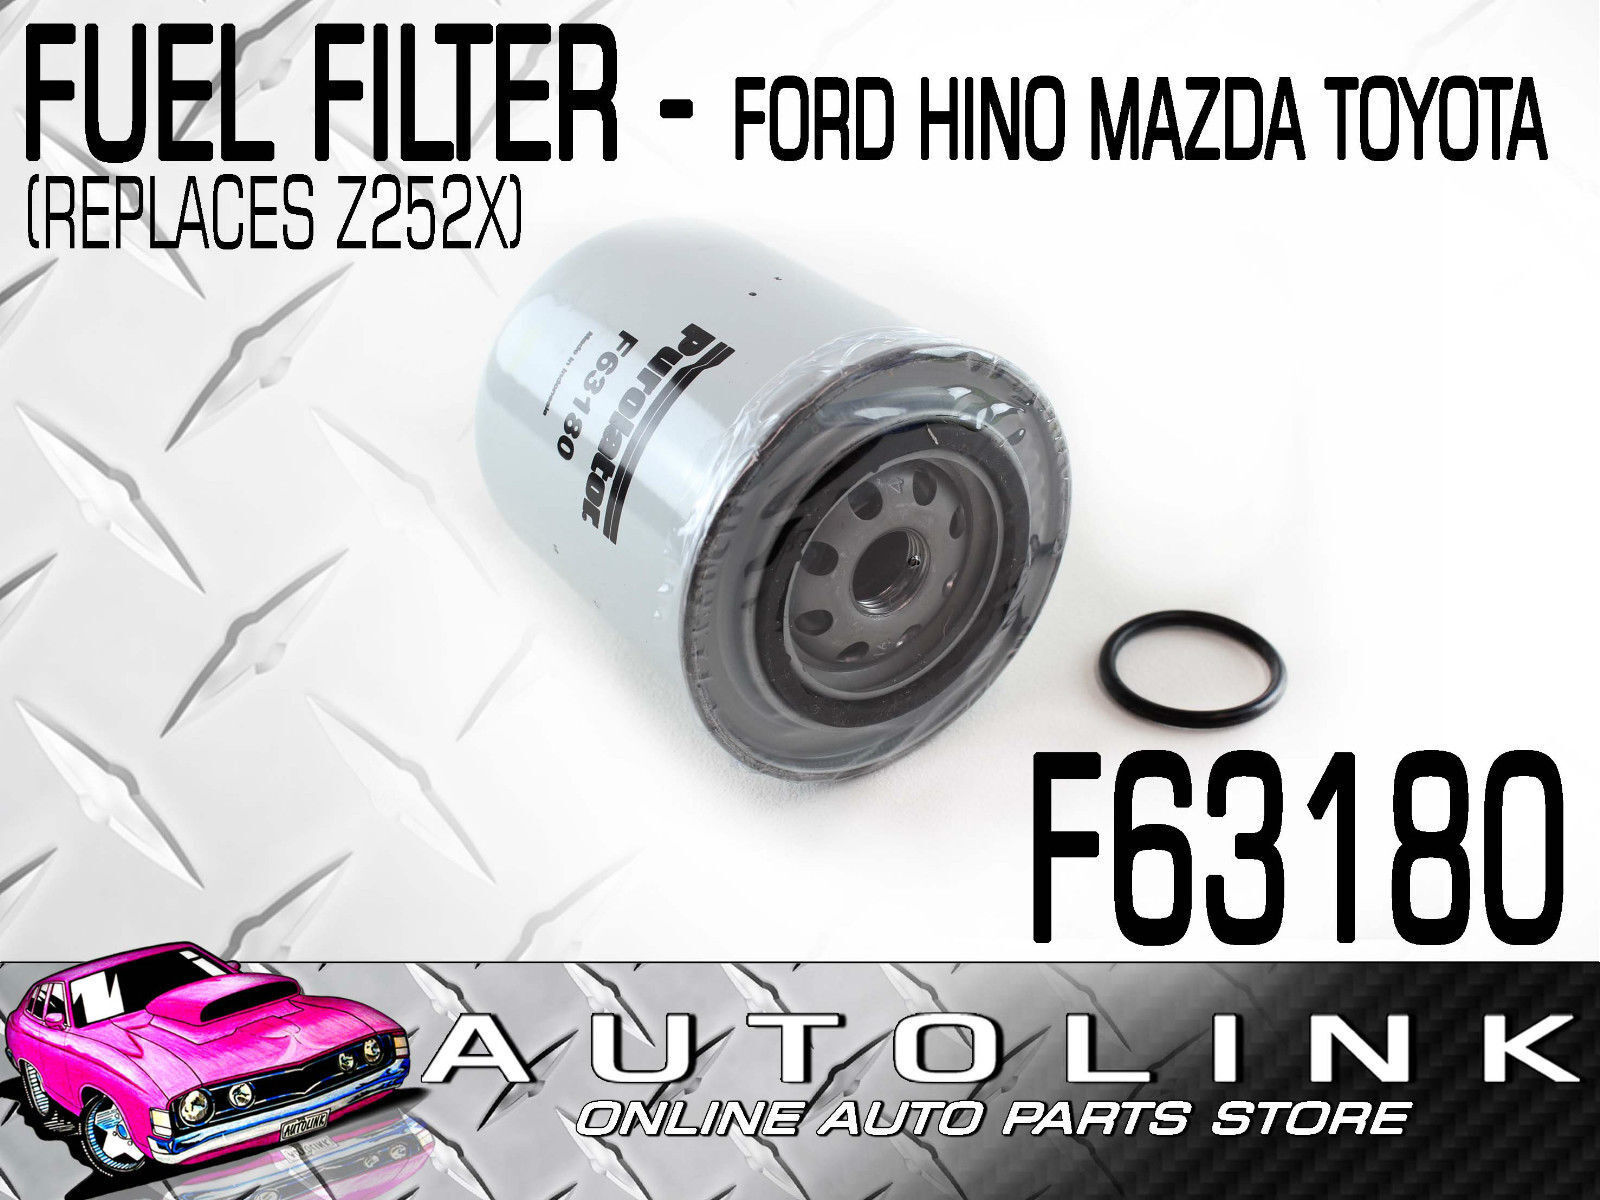 FUEL FILTER FOR TOYOTA COROLLA CE100 4CYL 1.9lt CRESSIDA